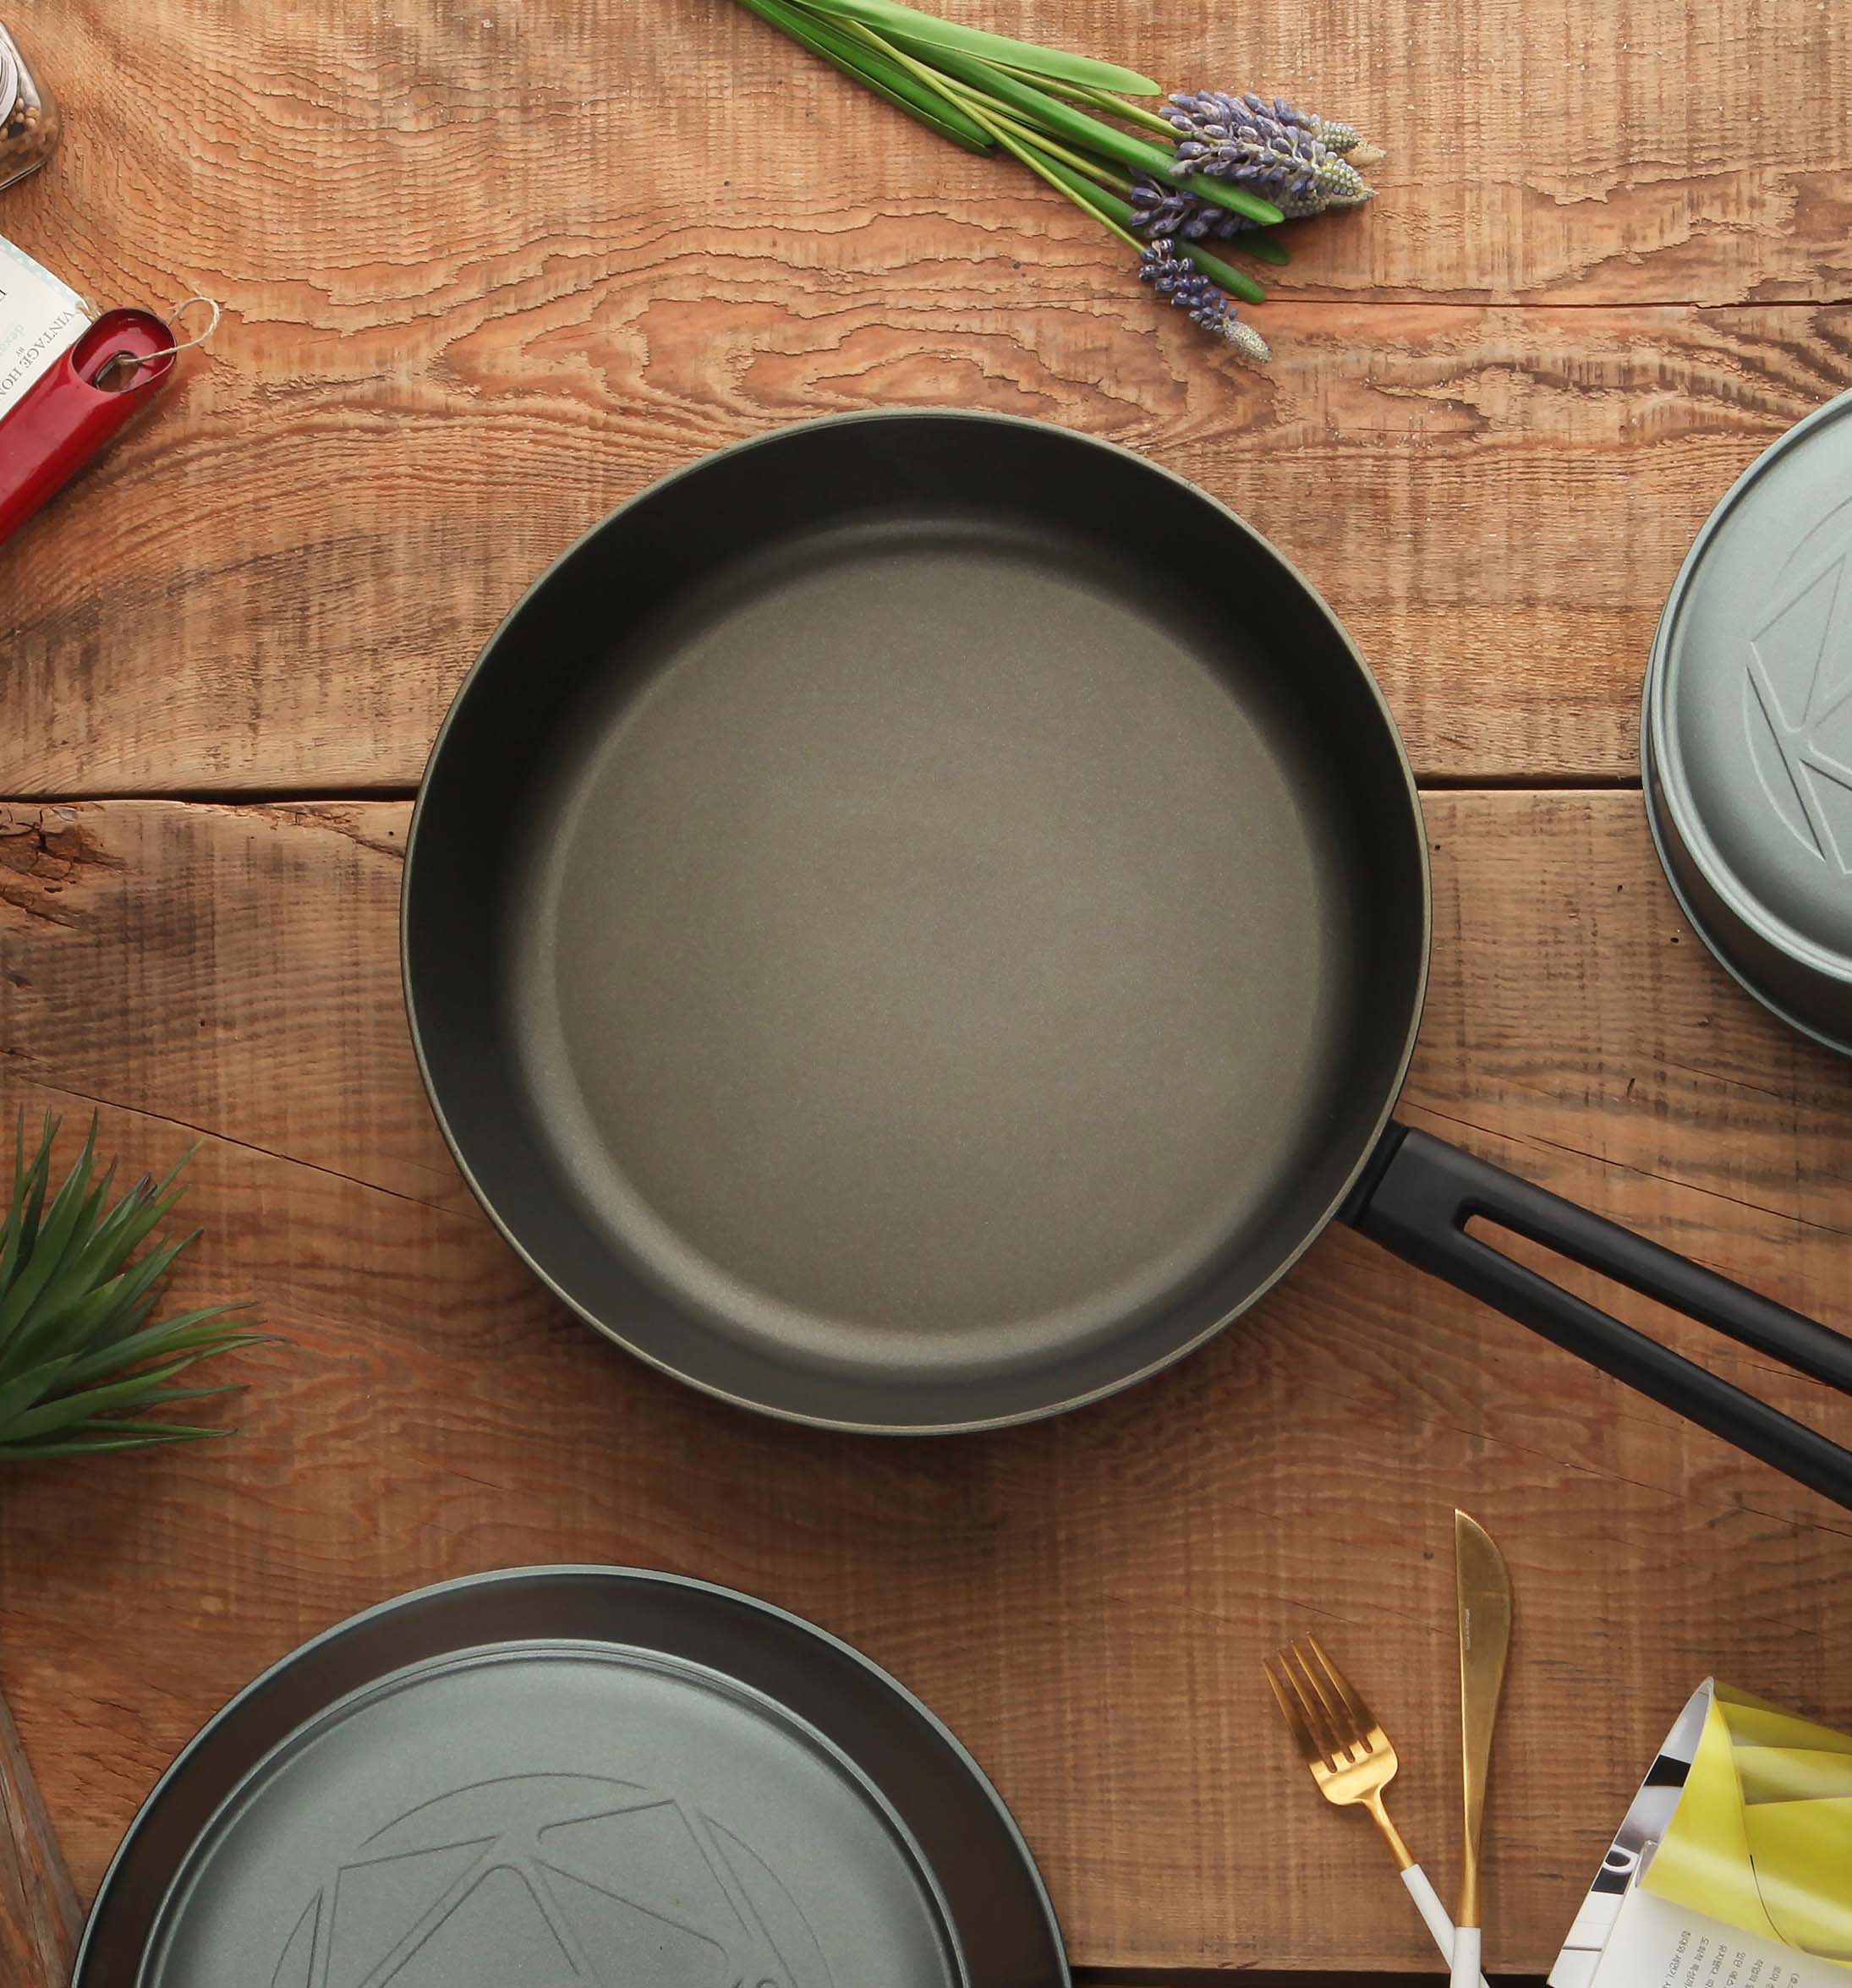 This Image Shows a Nonstick Cookware Made in Korea By Chef Yori Cookware. Chef Yori Is The World Best Nonstick Cookware Manufacturer and Wholesaler.